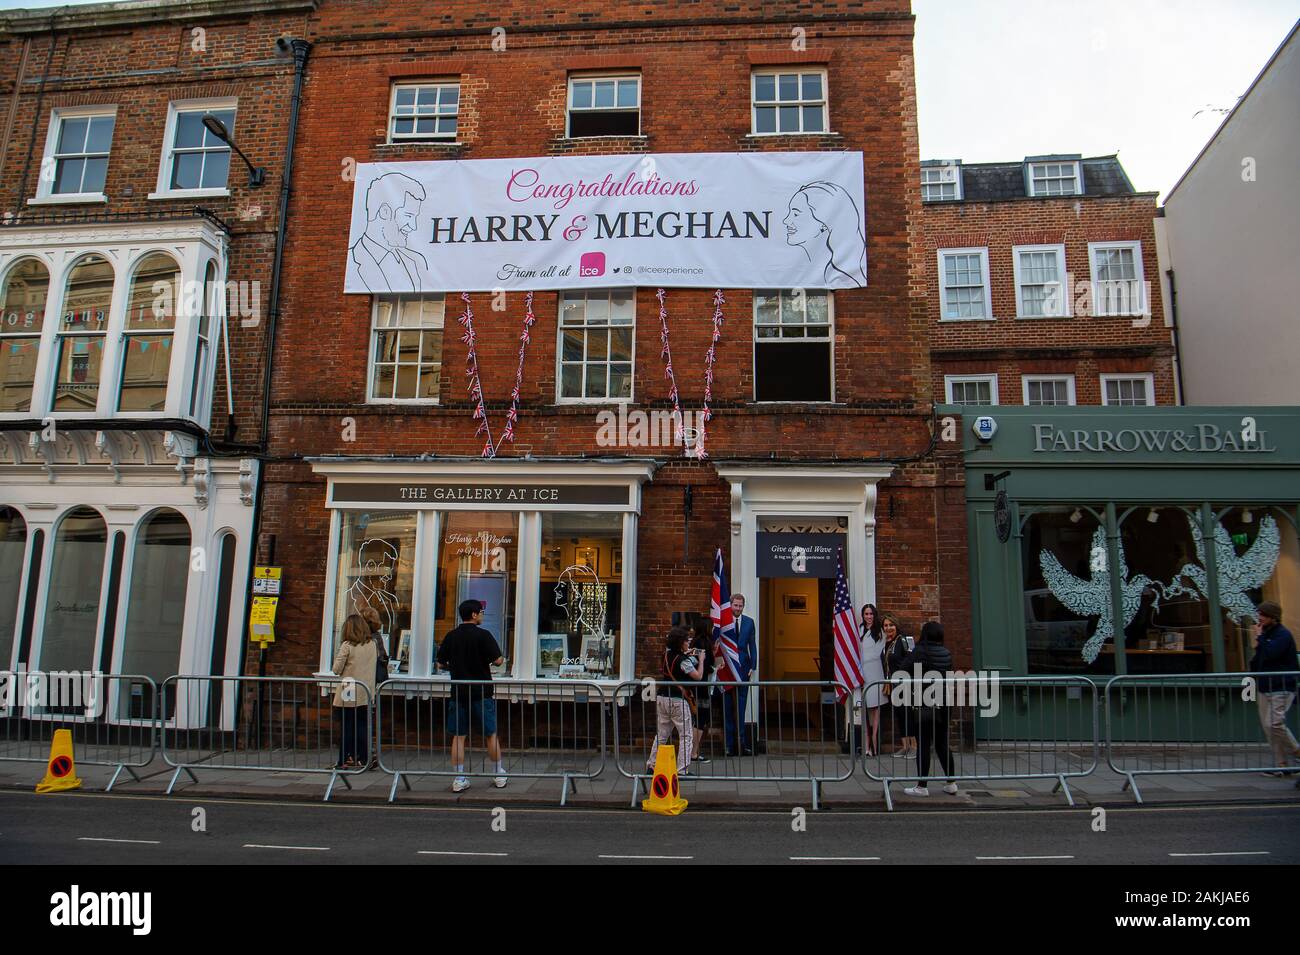 Windsor prepares for the Royal Wedding of Prince Harry and Meghan Markle. 18th May, 2018. A congraulations sign on a gallery in Windsor the night before Harry and Meghan’s wedding. Credit: Maureen McLean/Alamy Stock Photo